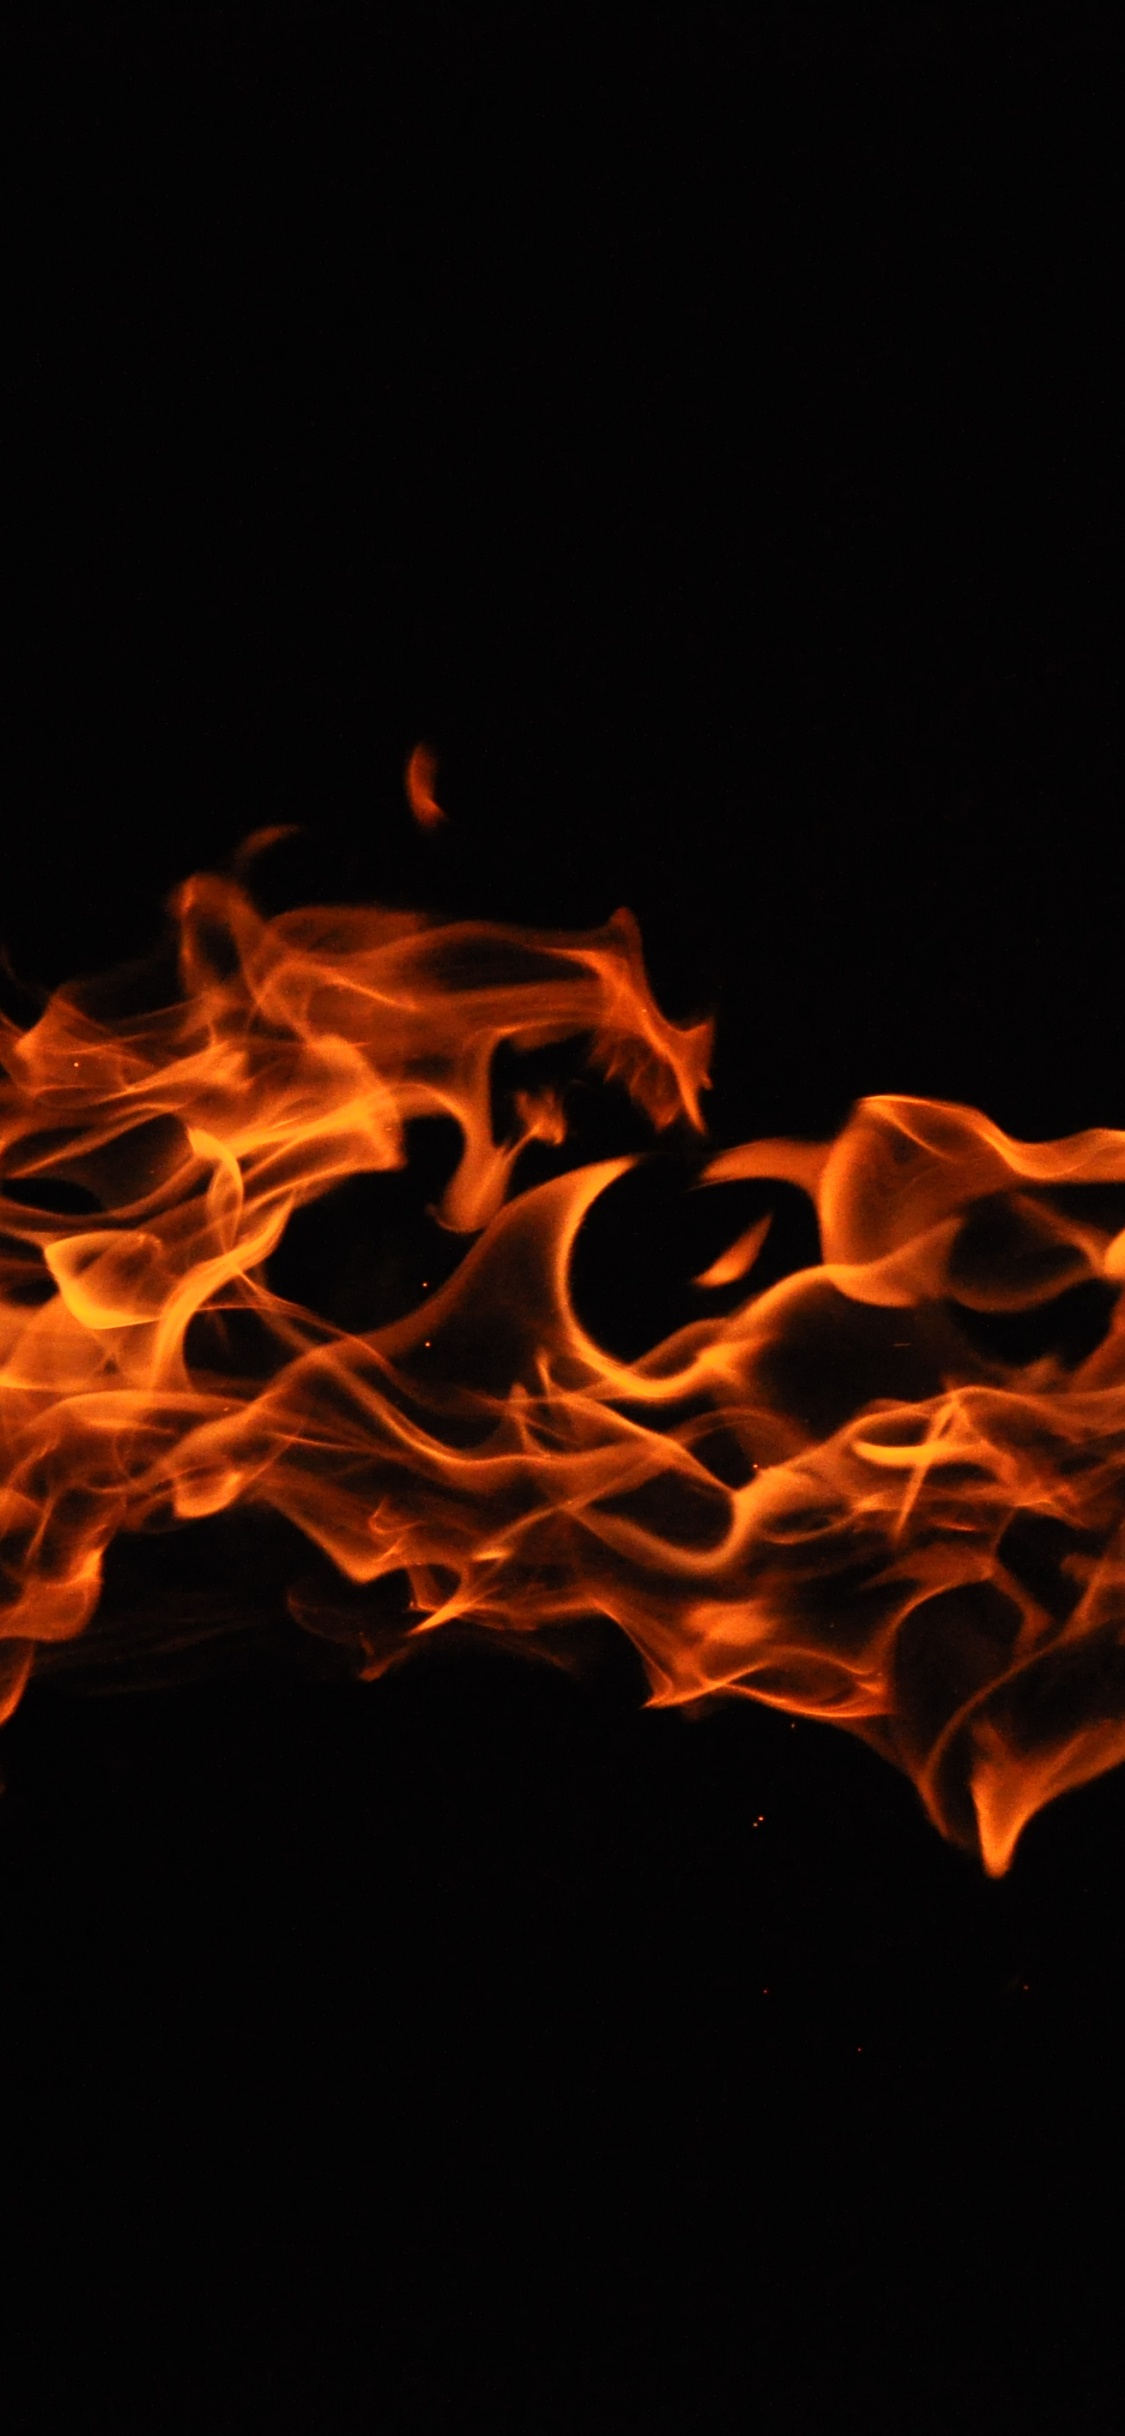 Fire in Black Background With Black Background. Wallpaper in 1125x2436 Resolution